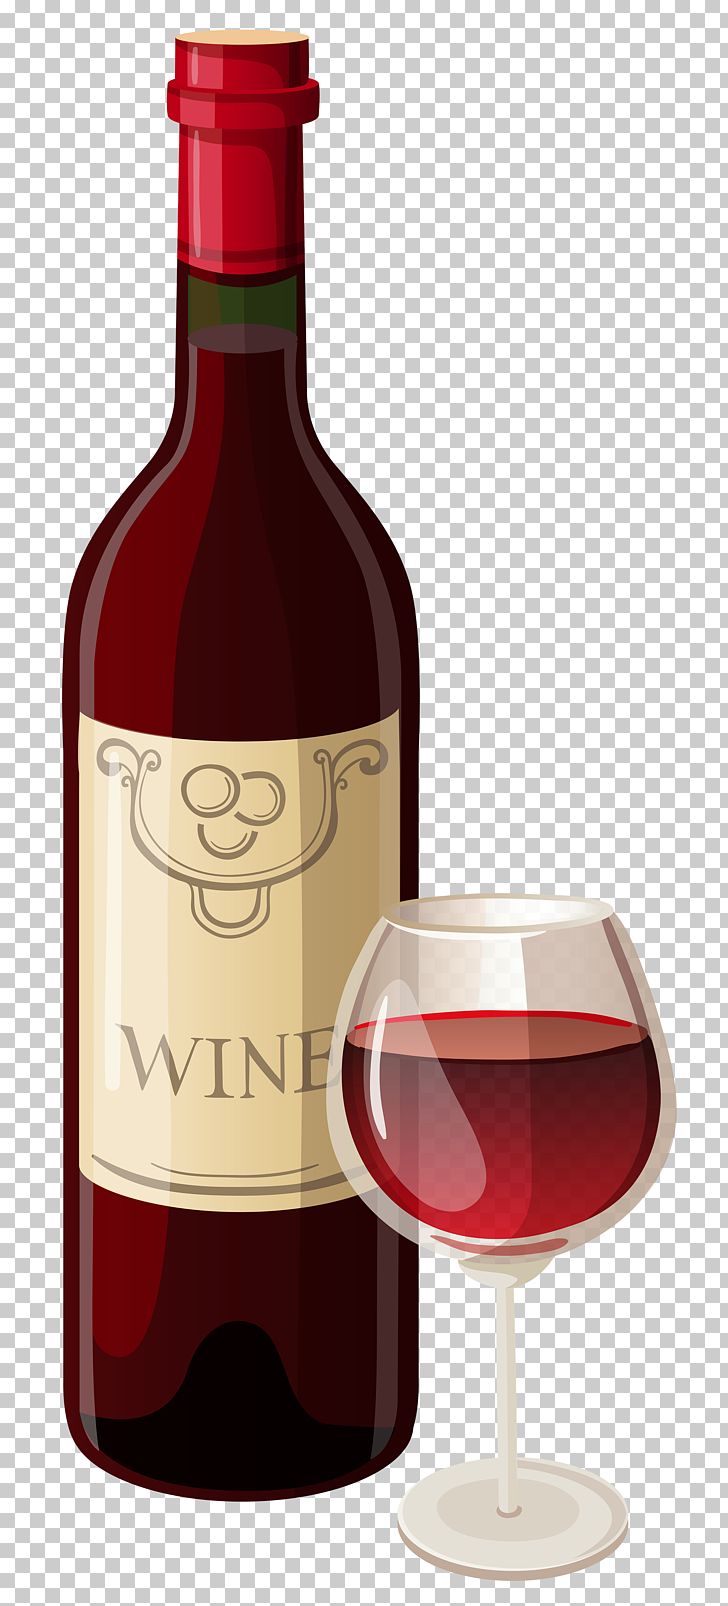 Red Wine Champagne Bottle PNG, Clipart, Bottle, Champagne, Clipart, Clip Art, Cup Free PNG Download